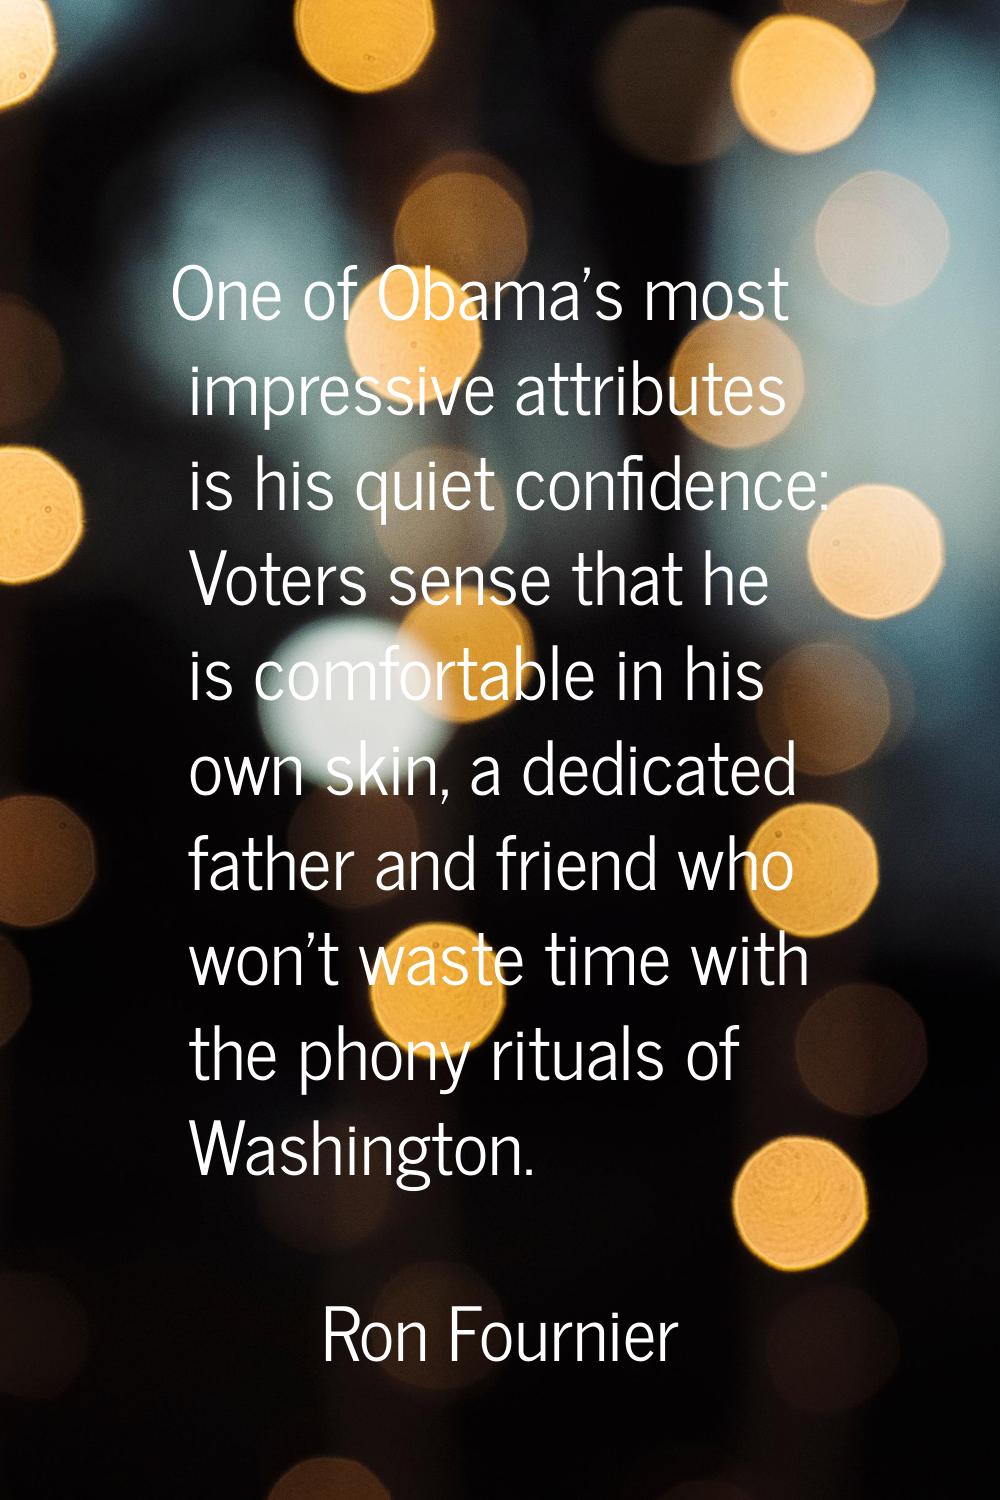 One of Obama's most impressive attributes is his quiet confidence: Voters sense that he is comforta